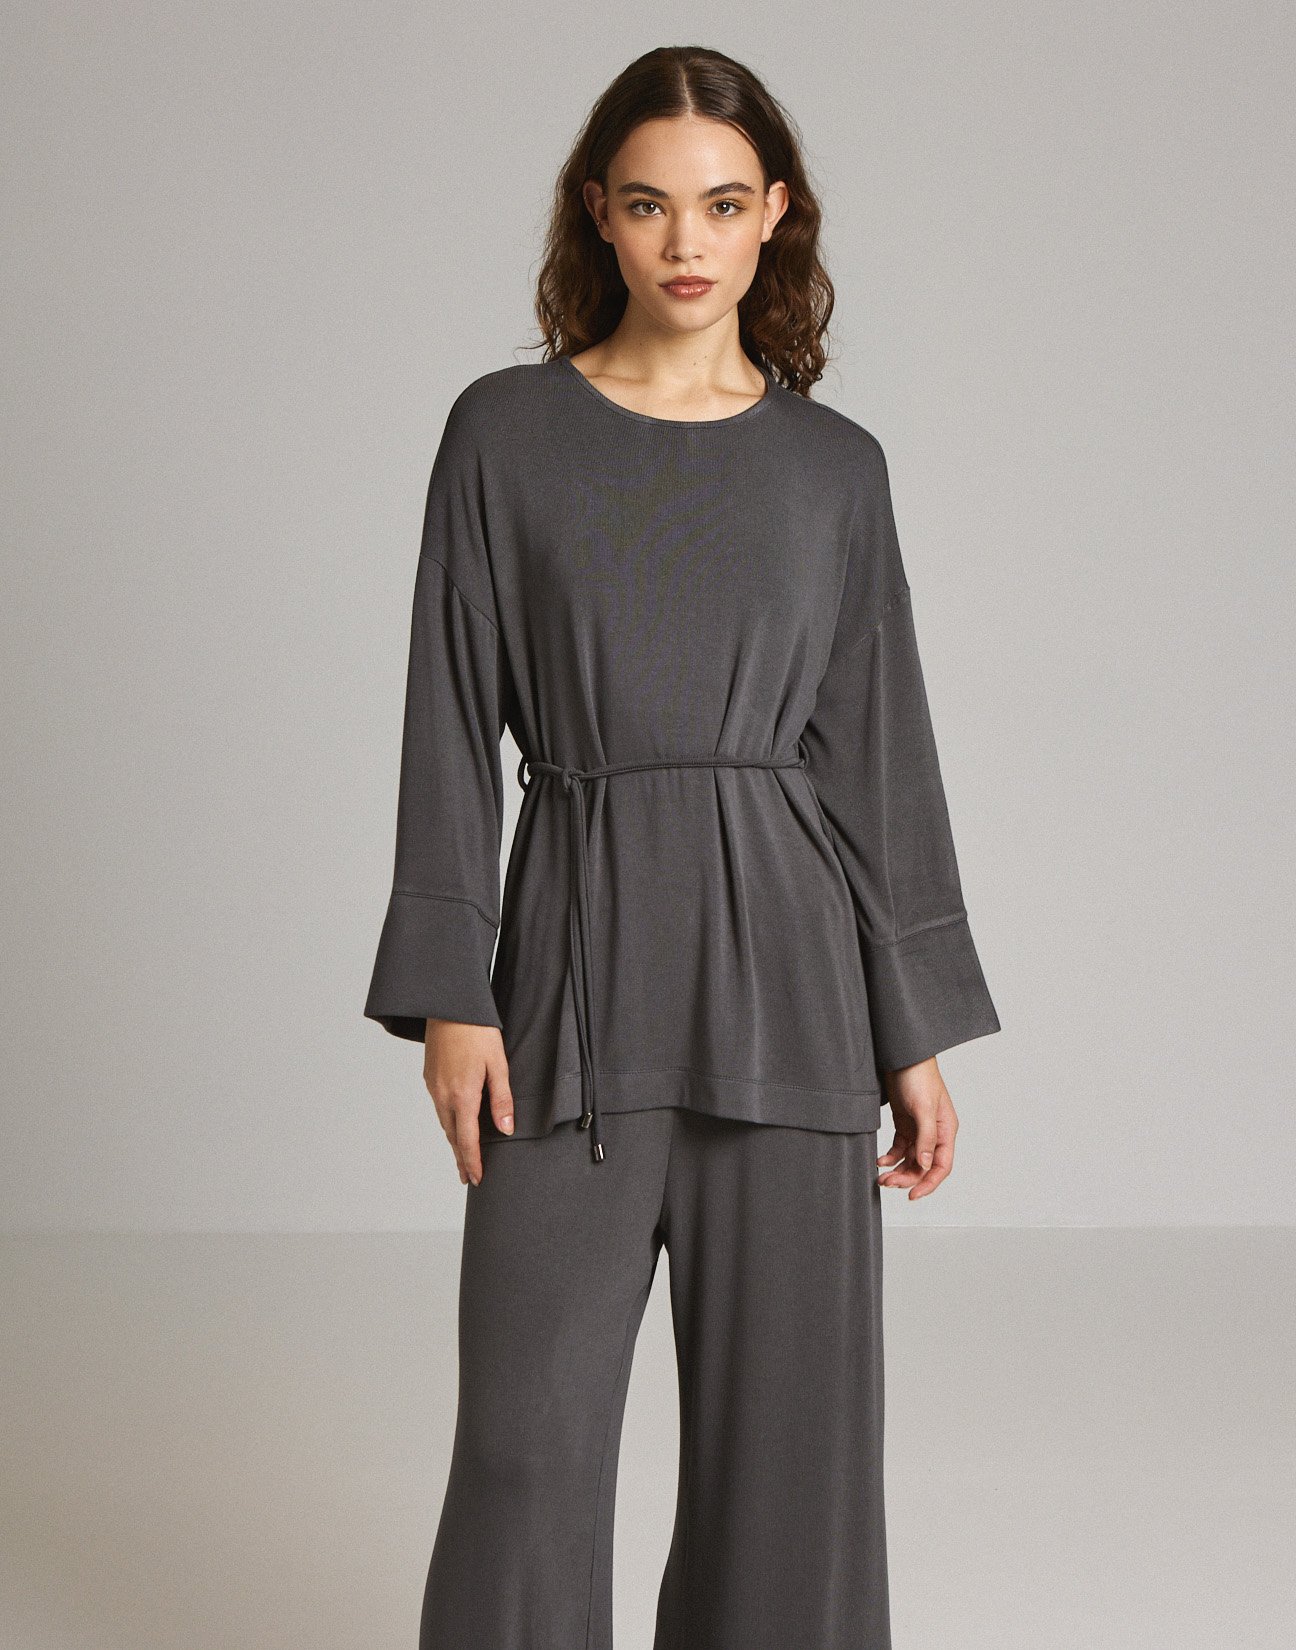 Oversized blouse with openings